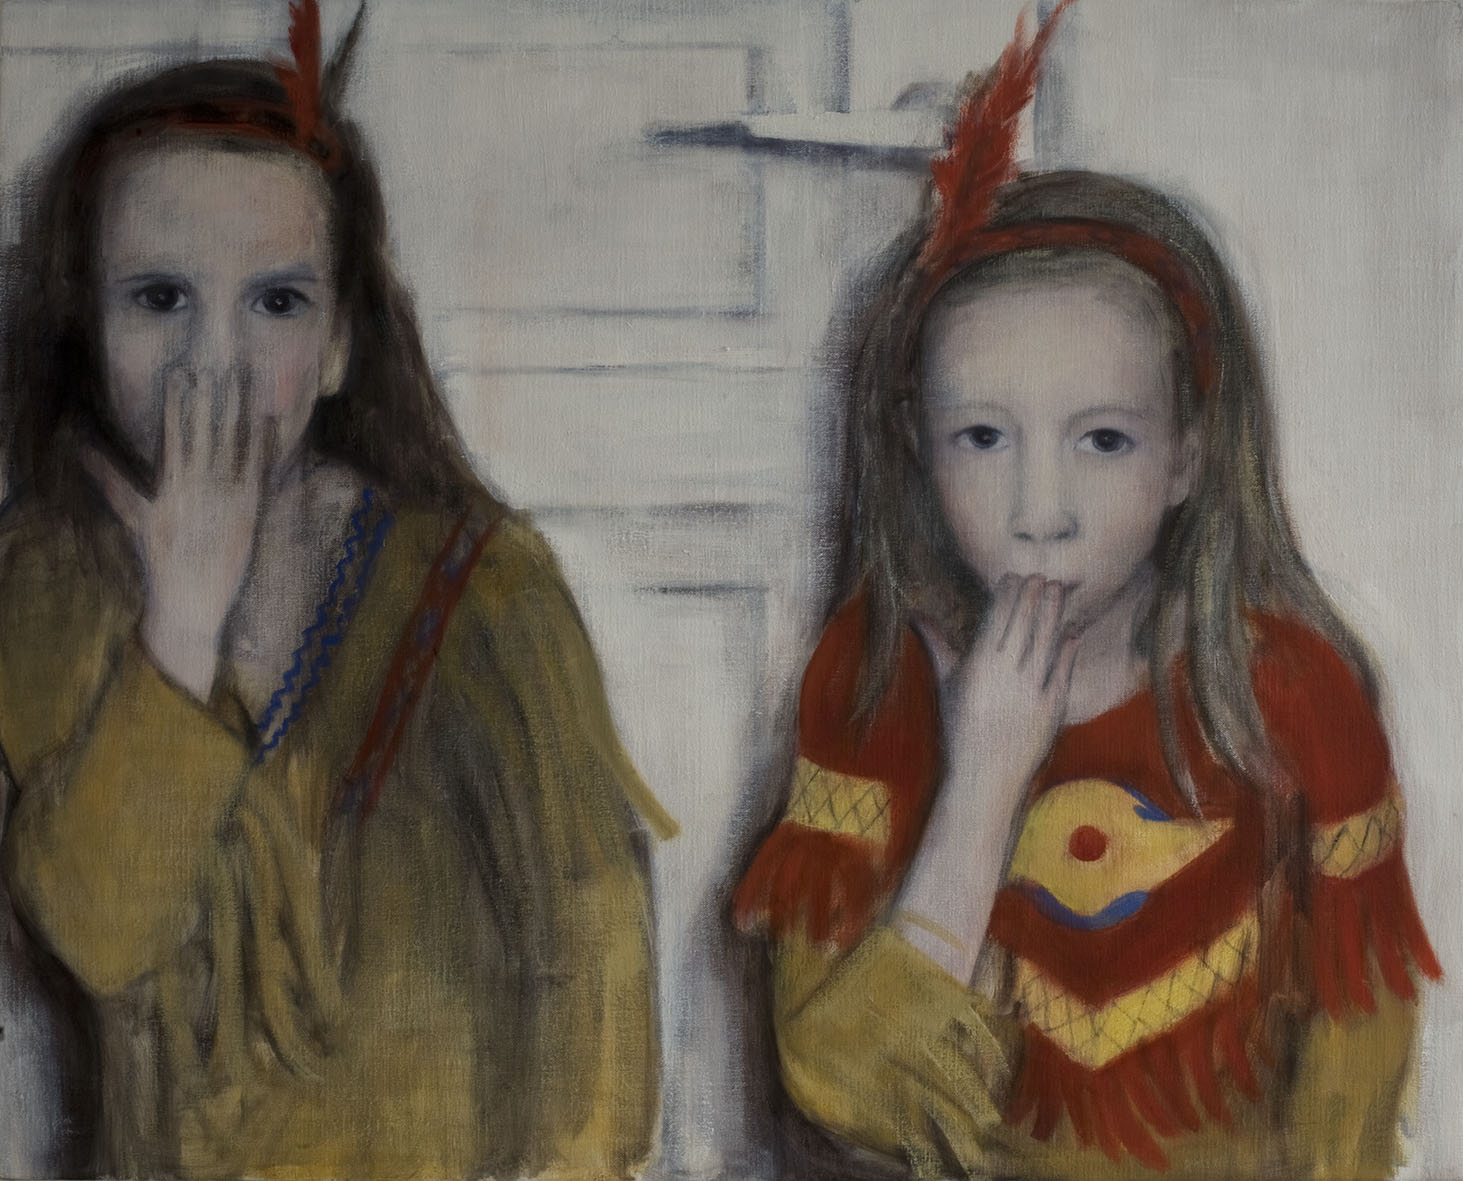   Girls with Indian costumes  Oil on canvas 80x100 cm 2009 